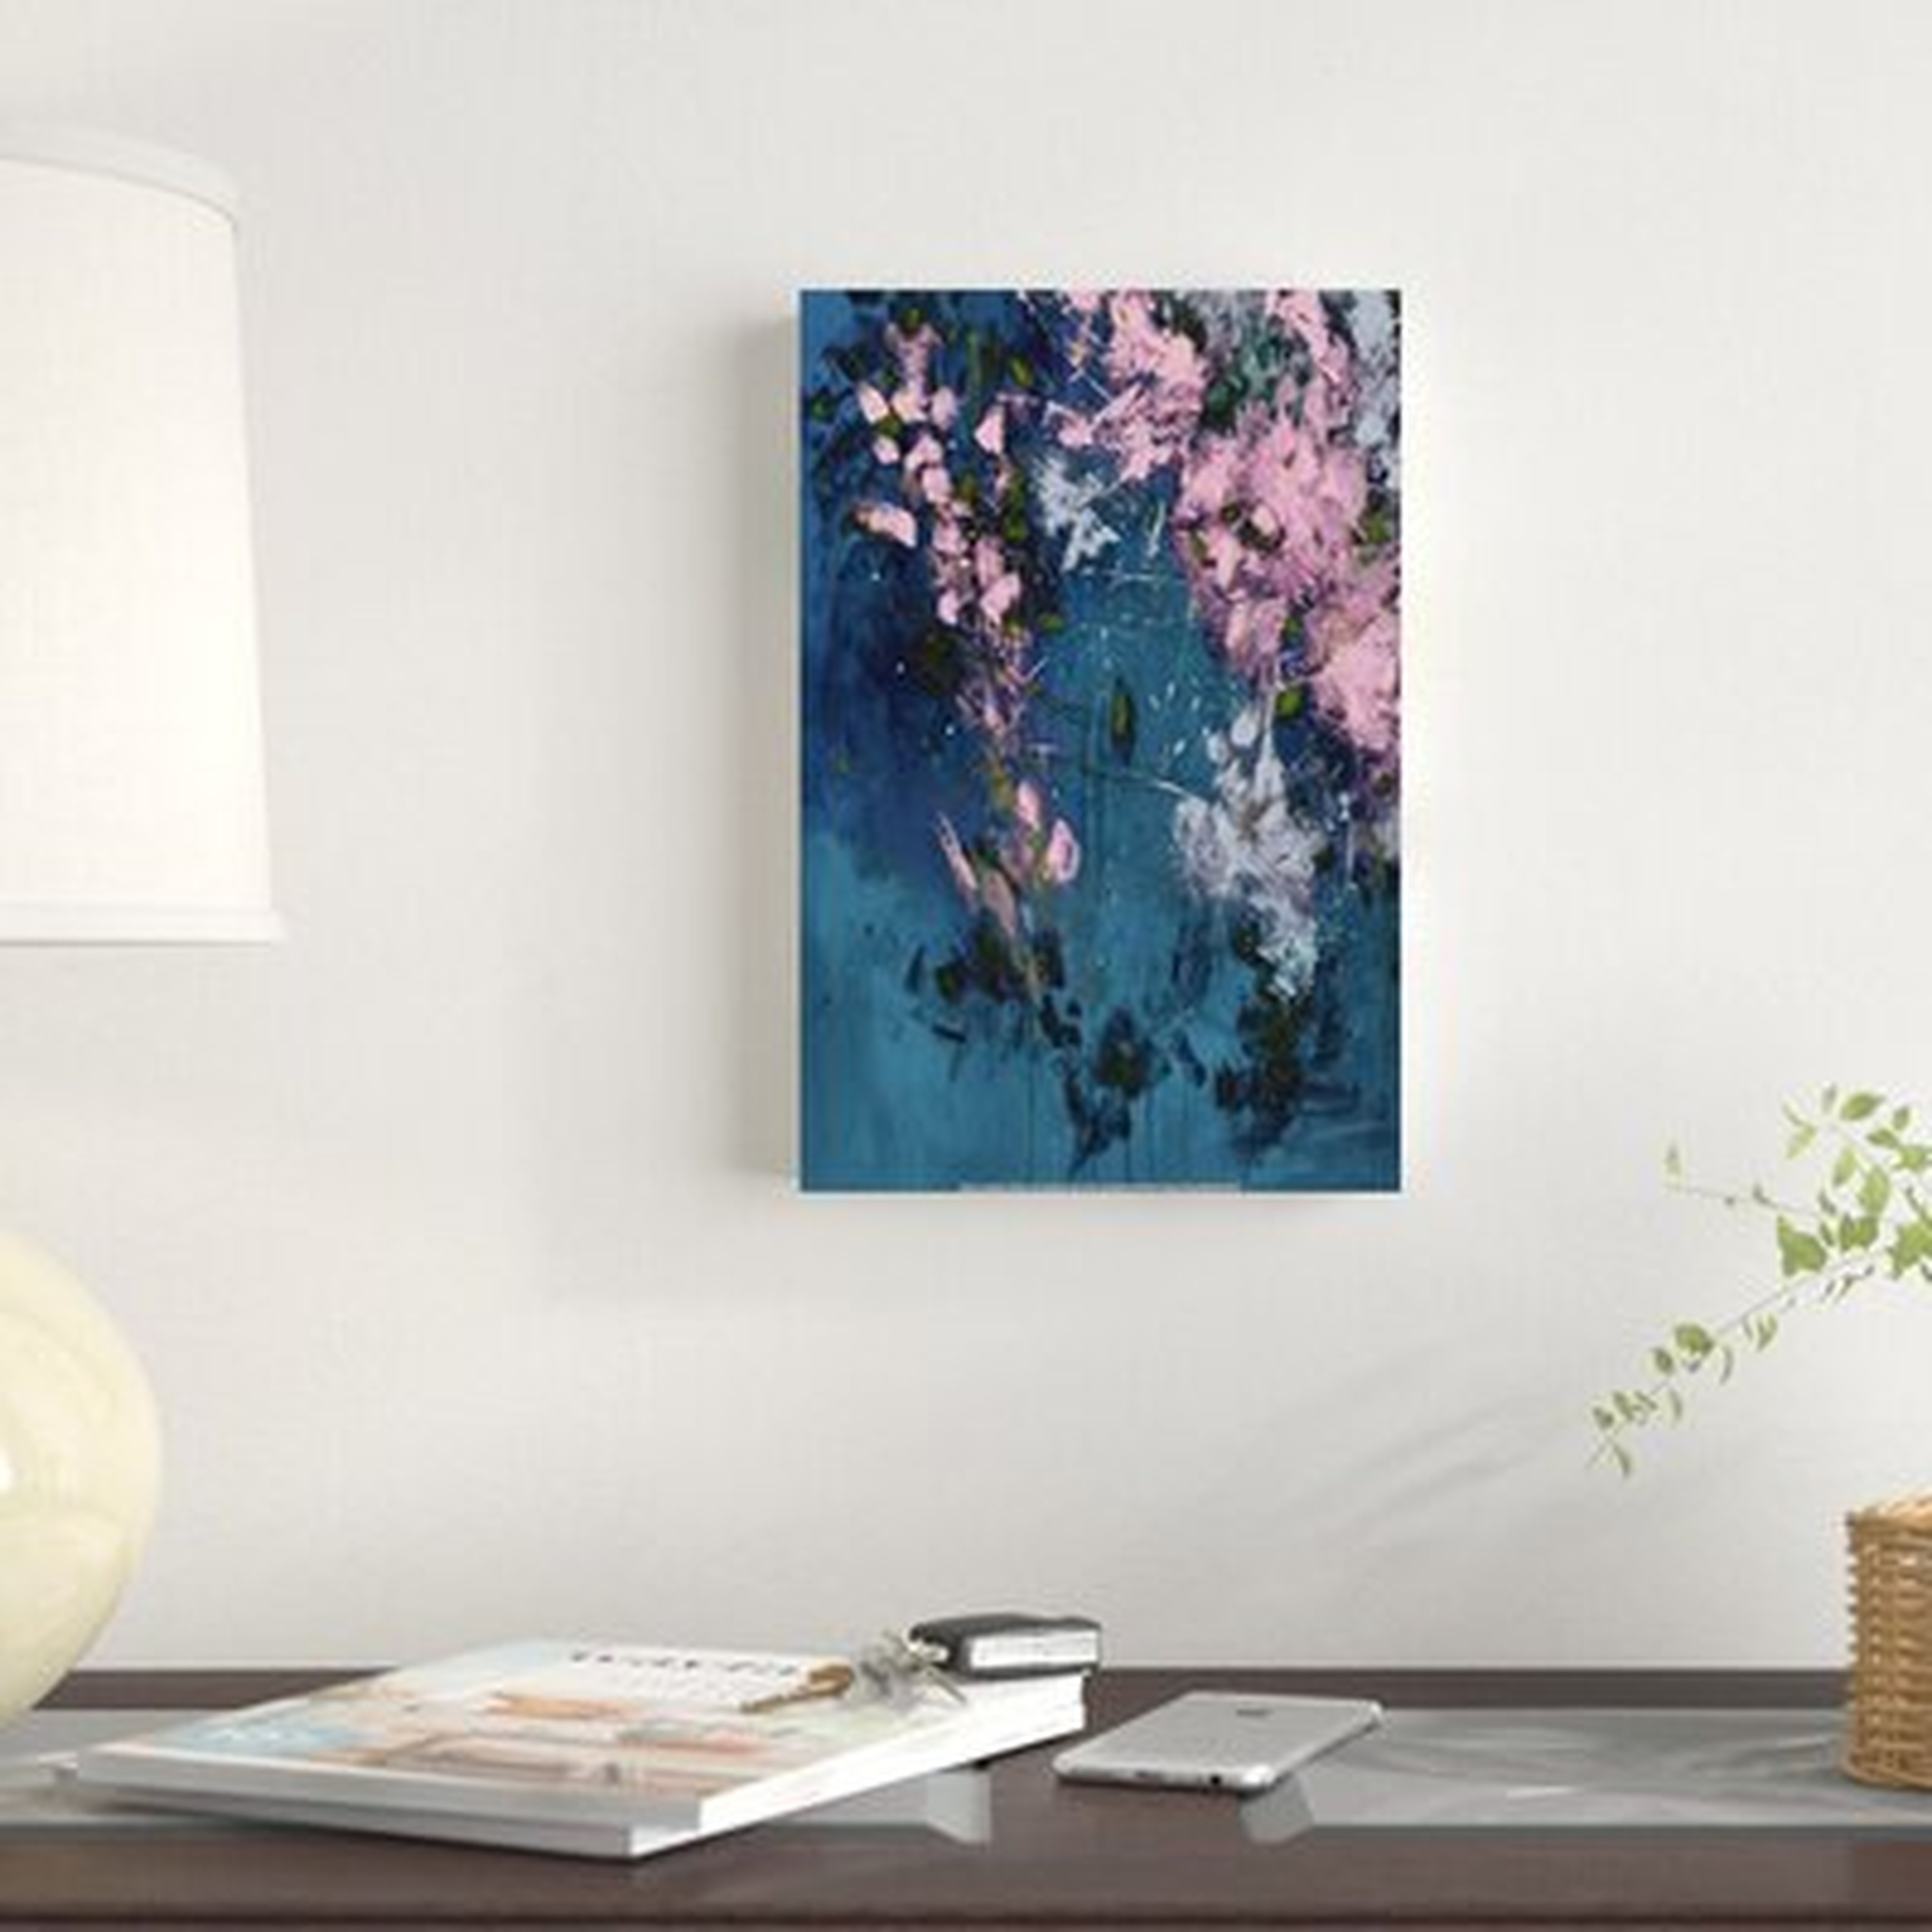 Emerald And Pink Abstract Print On Canvas - Wayfair